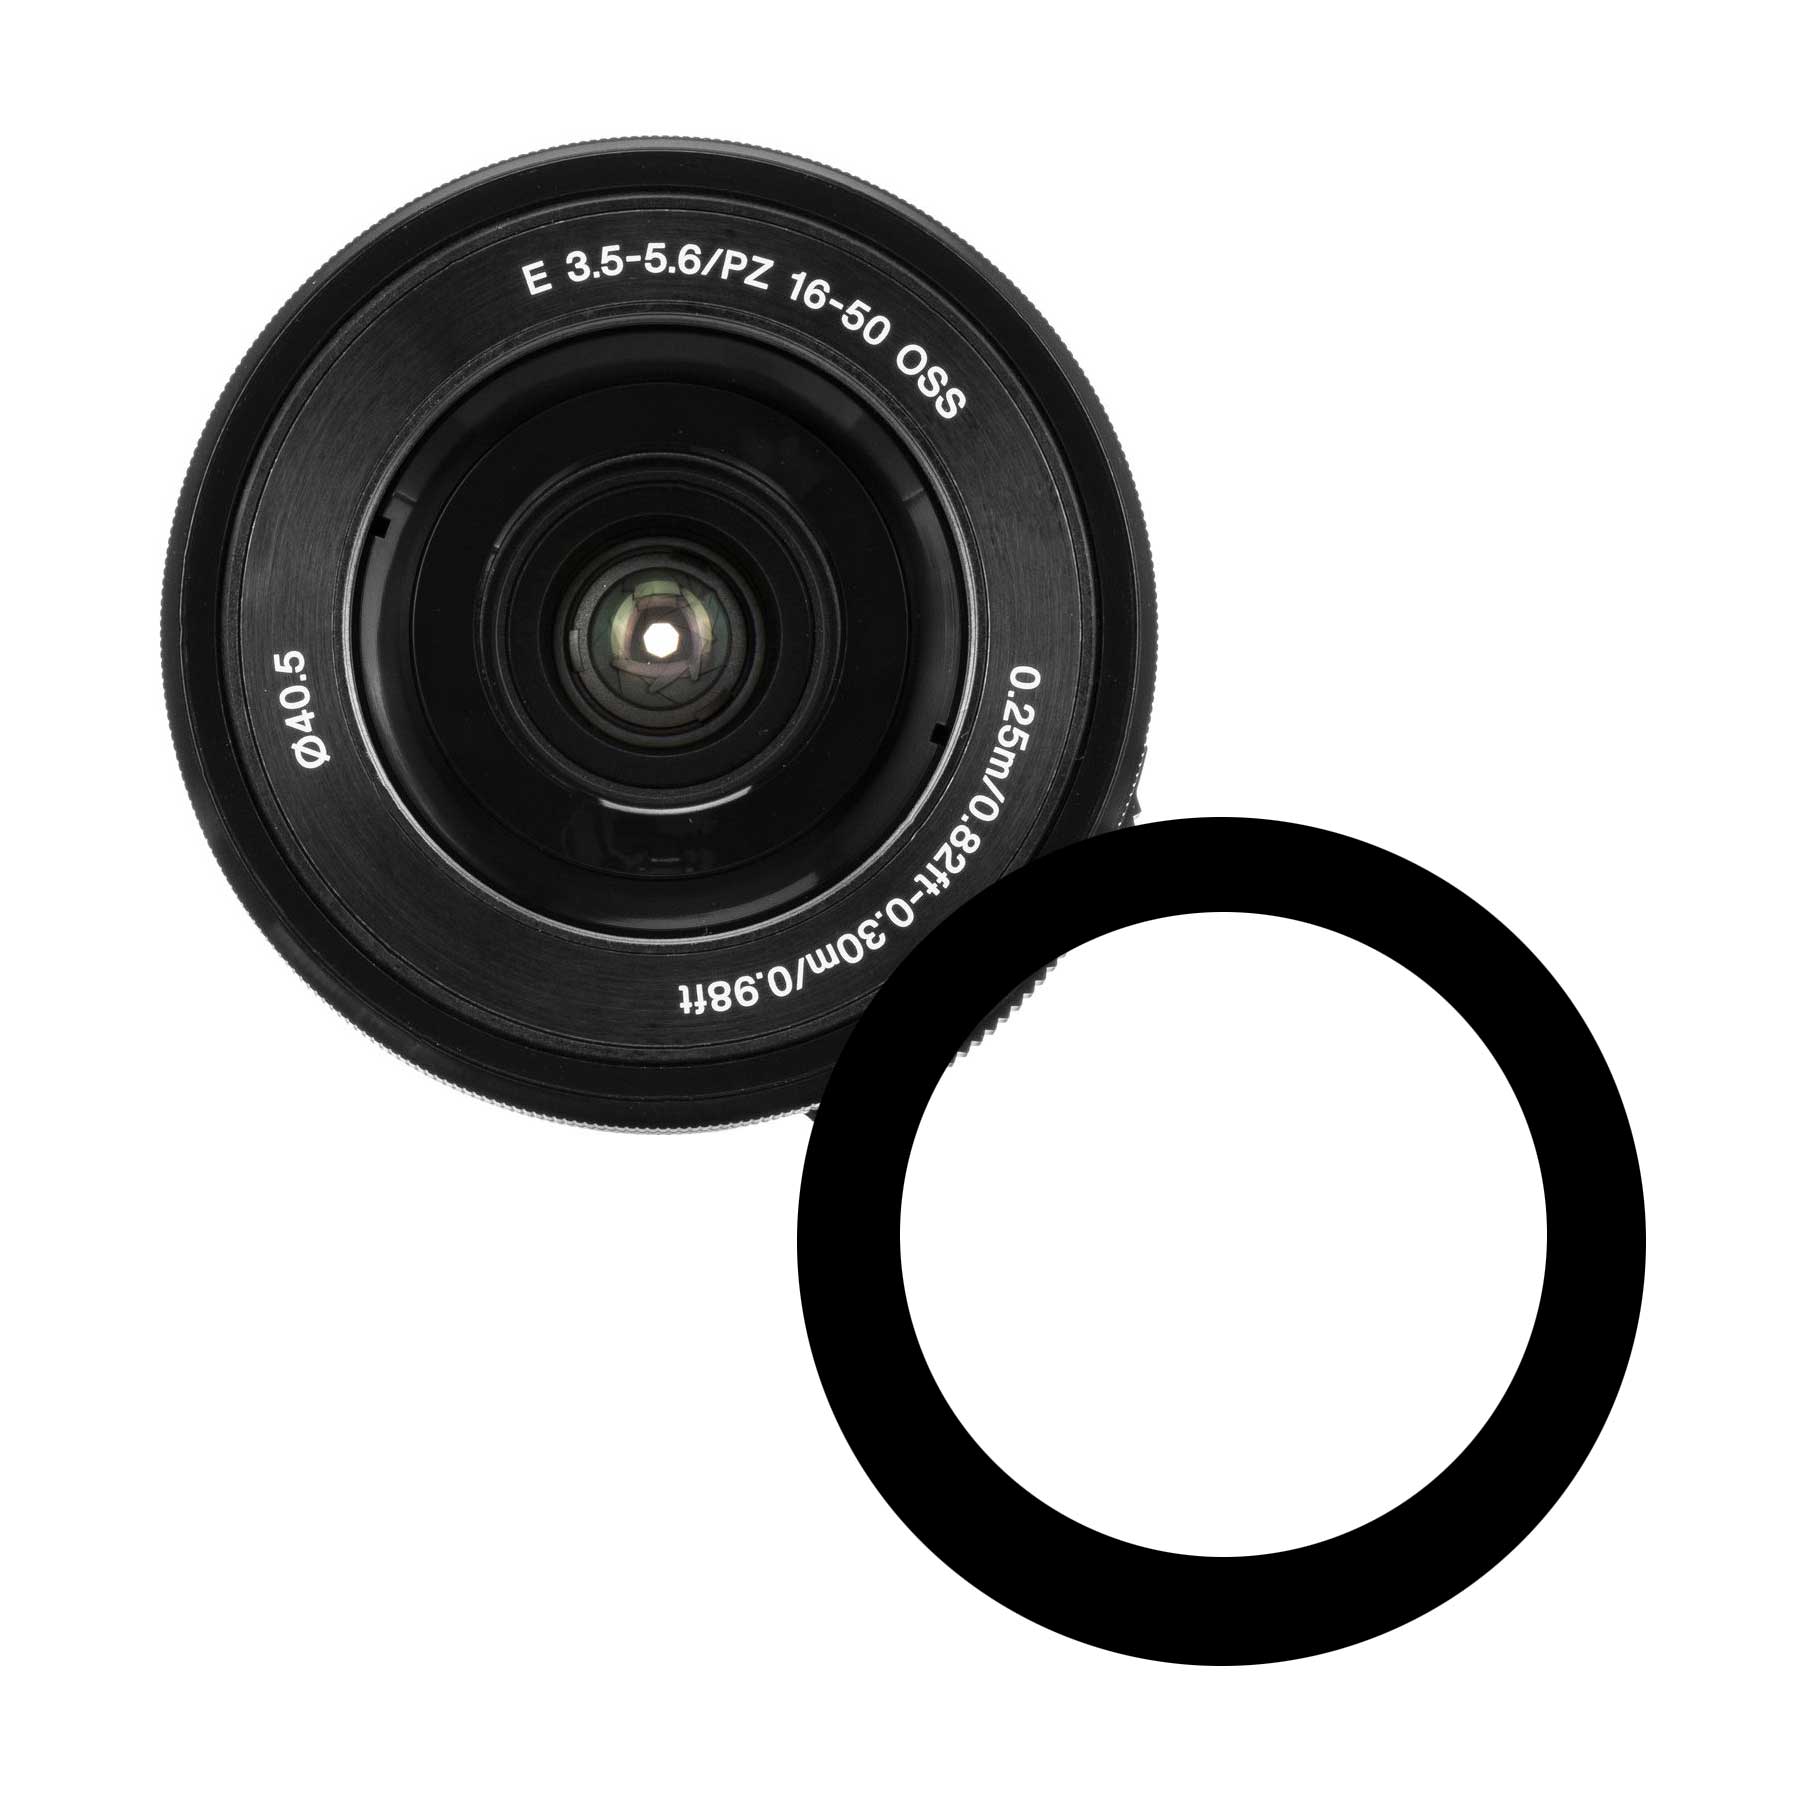 Anti-Reflection Ring for Sony 16-50mm f/3.5-5.6 OSS Lens